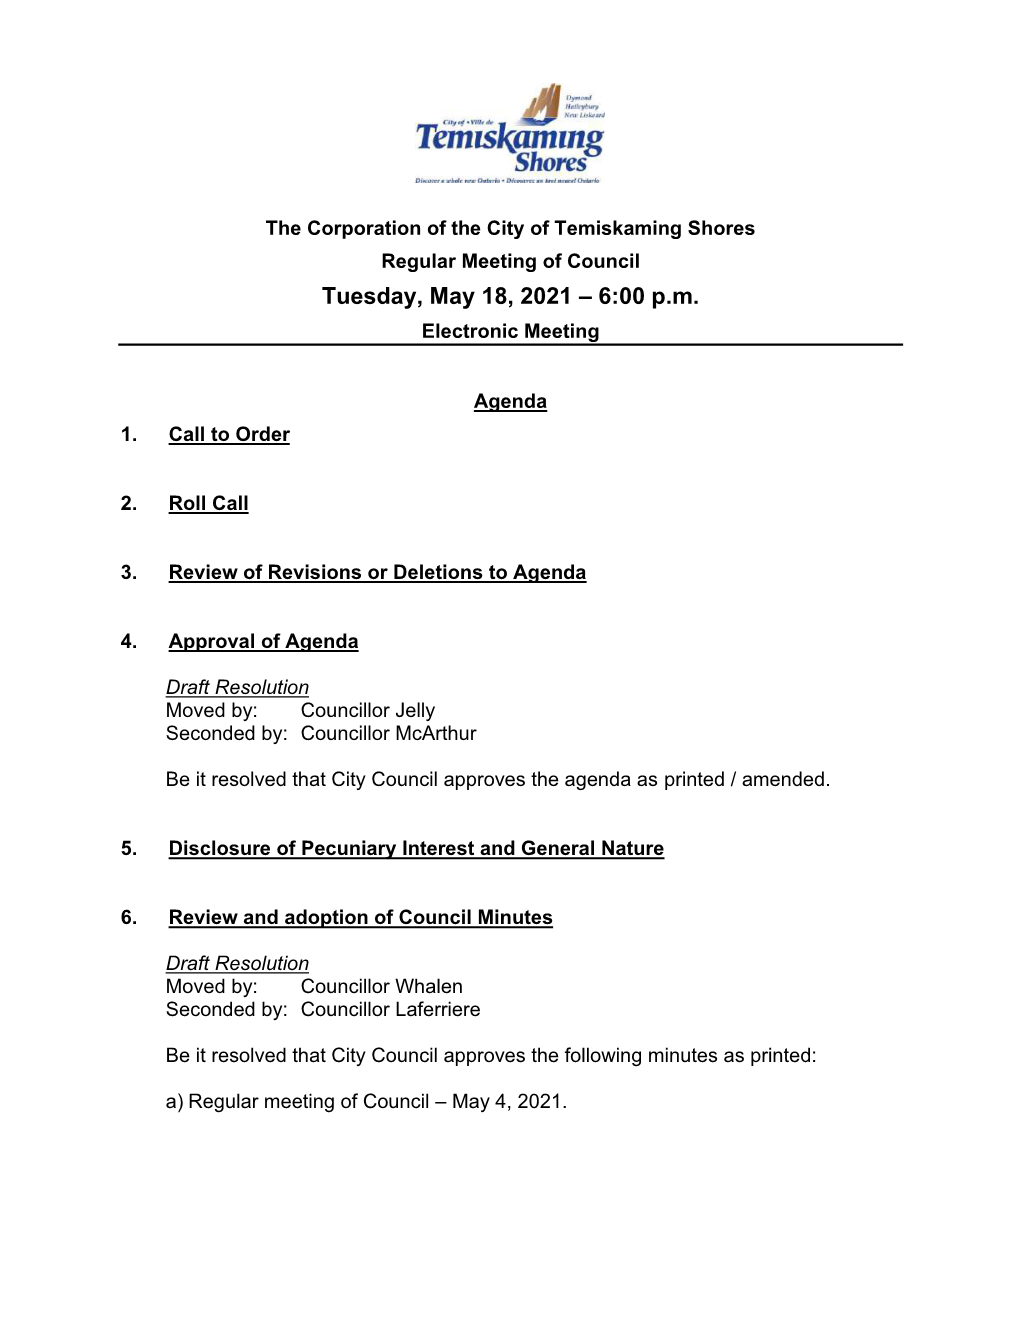 Tuesday, May 18, 2021 – 6:00 P.M. Electronic Meeting